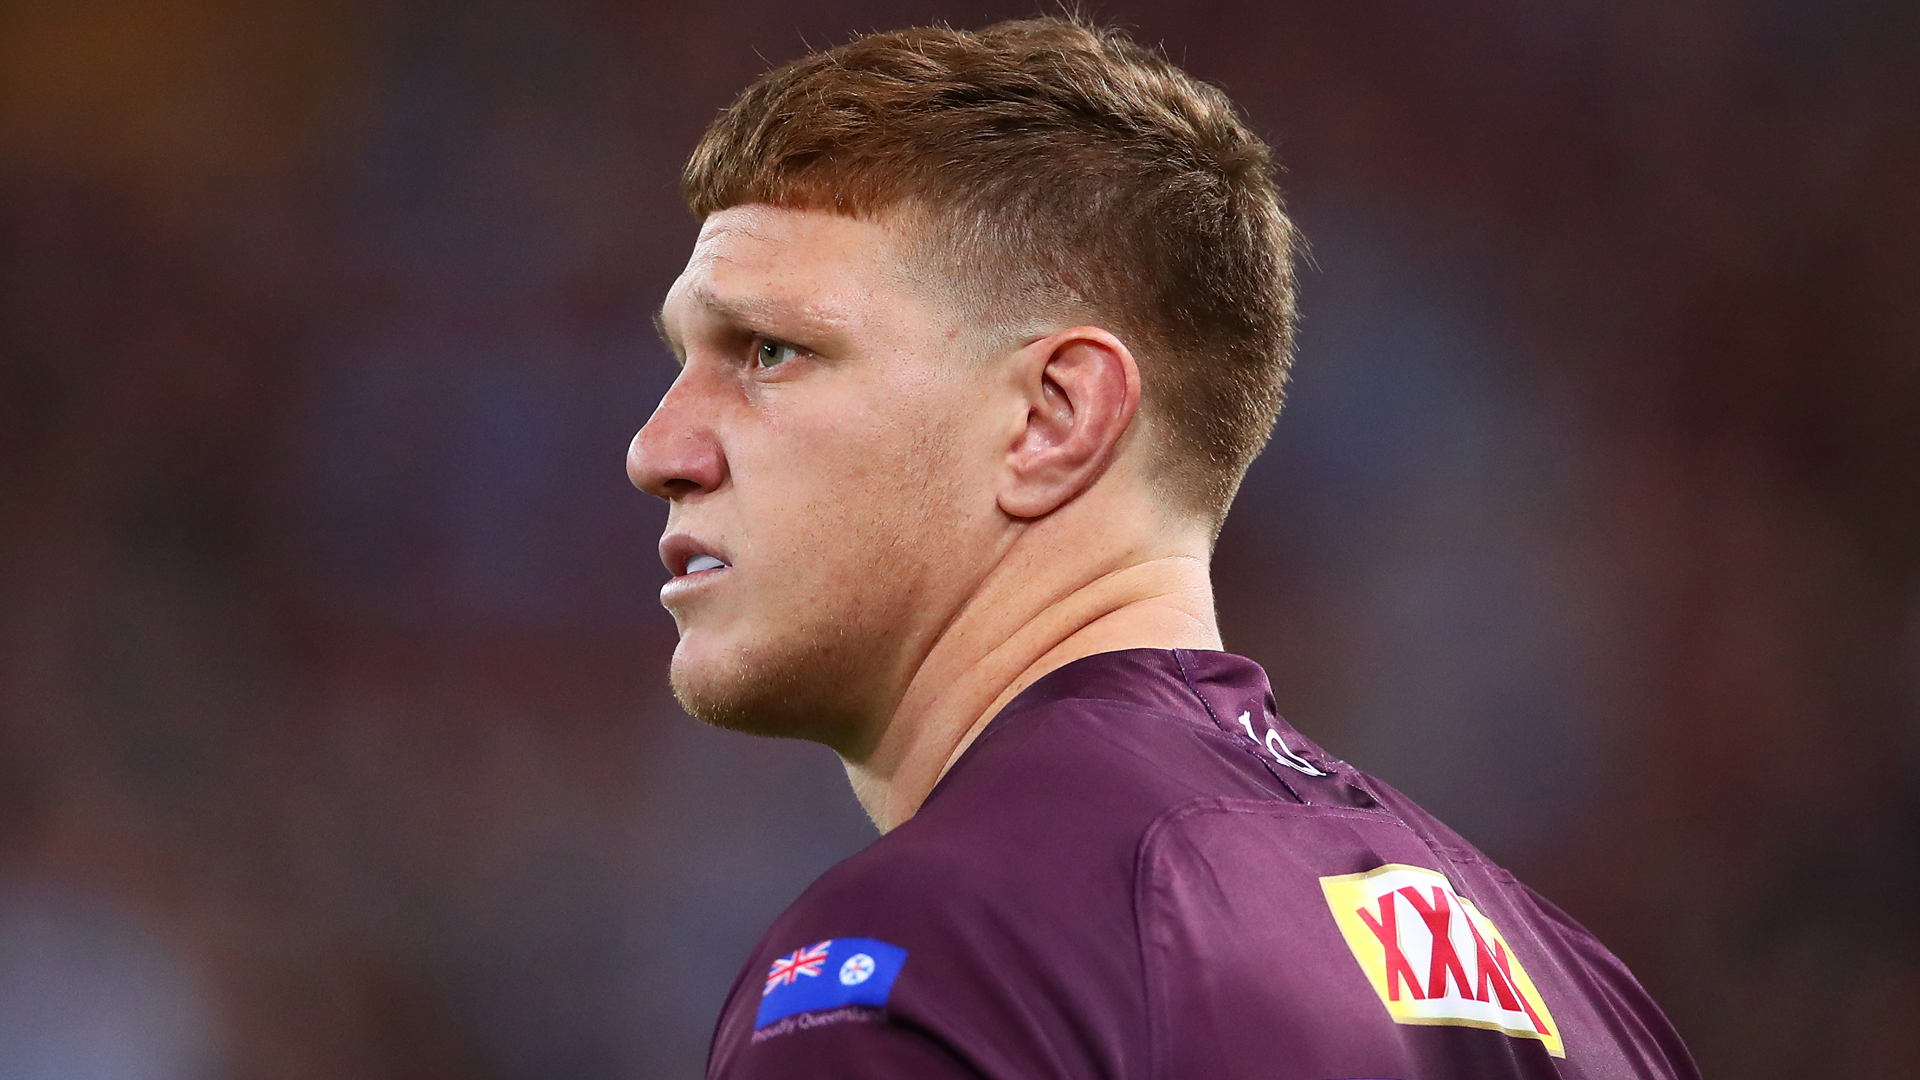 Dylan Napa has a break in one of his wrist bones, but Queensland are hopeful over his availability for game two.